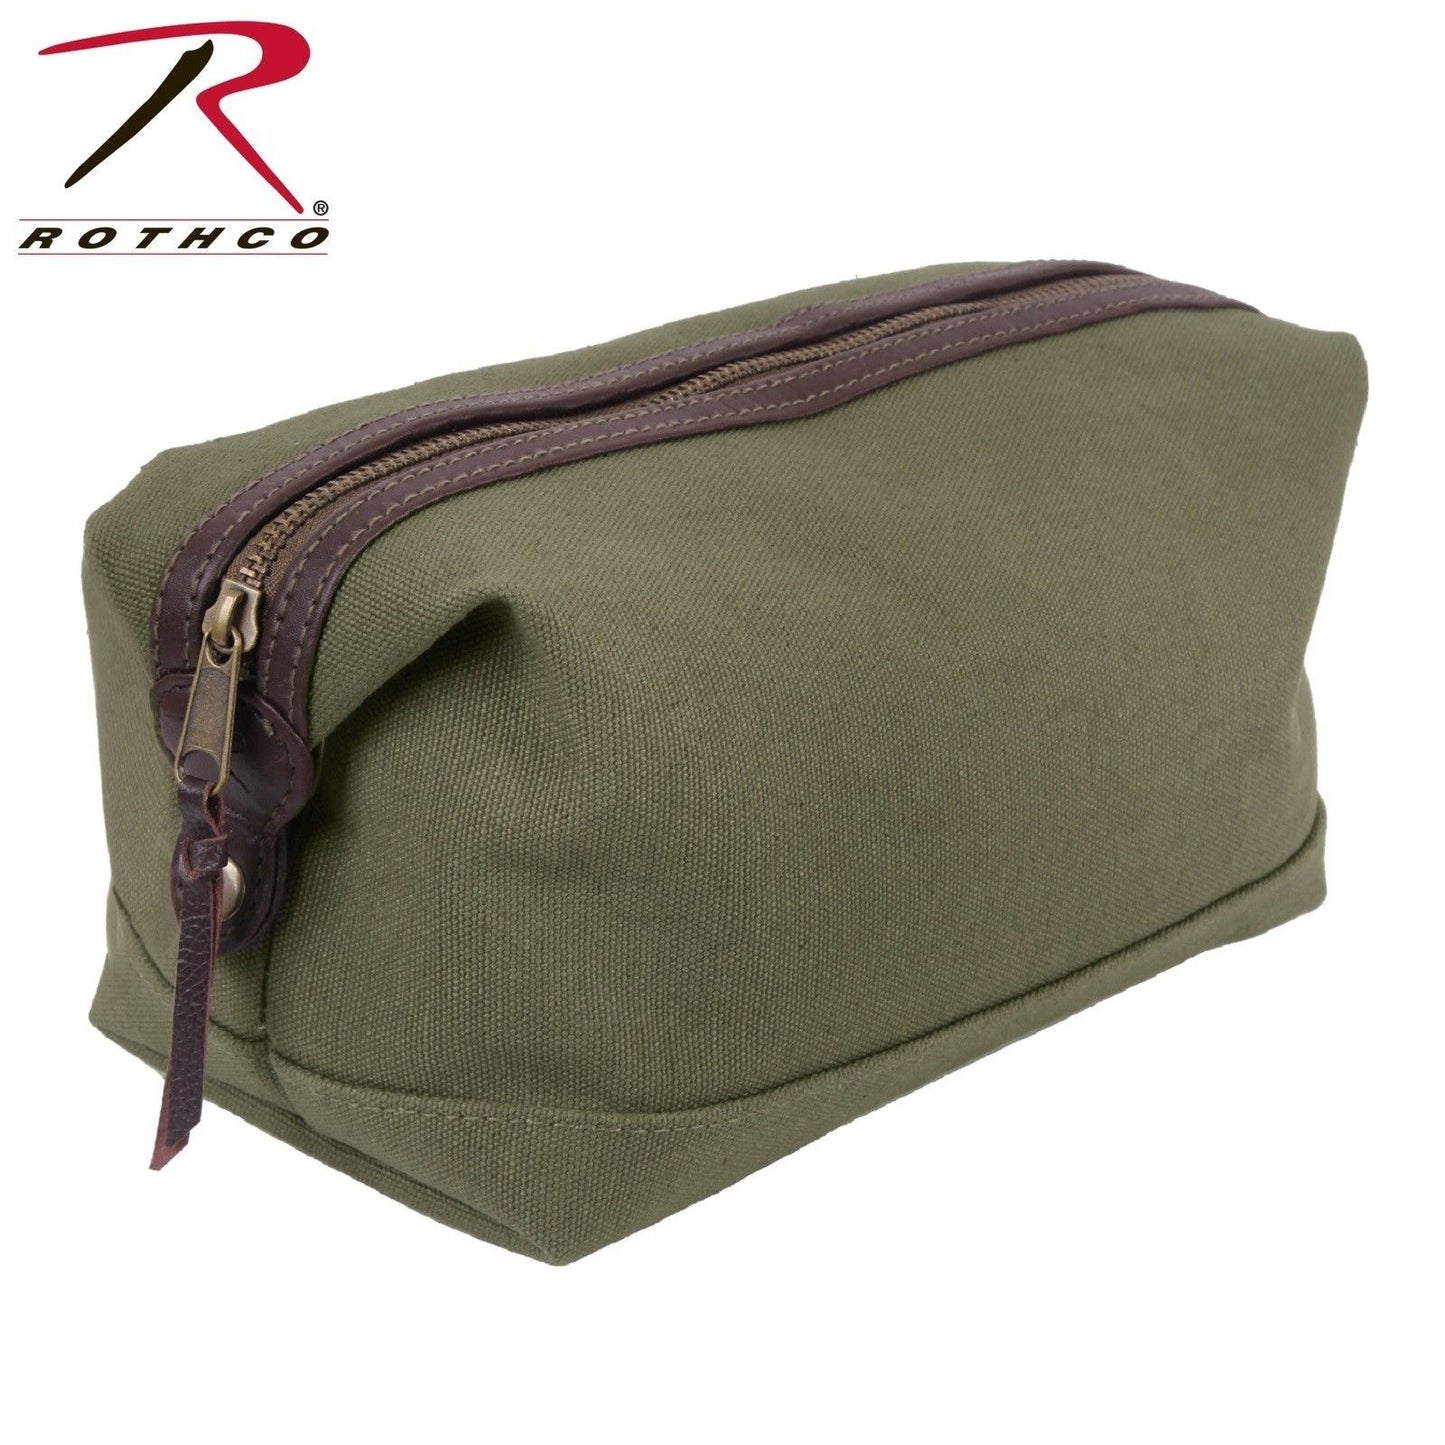 Rothco Canvas Leather Travel Kit - Olive Drab Dopp Type Bag Toiletry Travel Bag